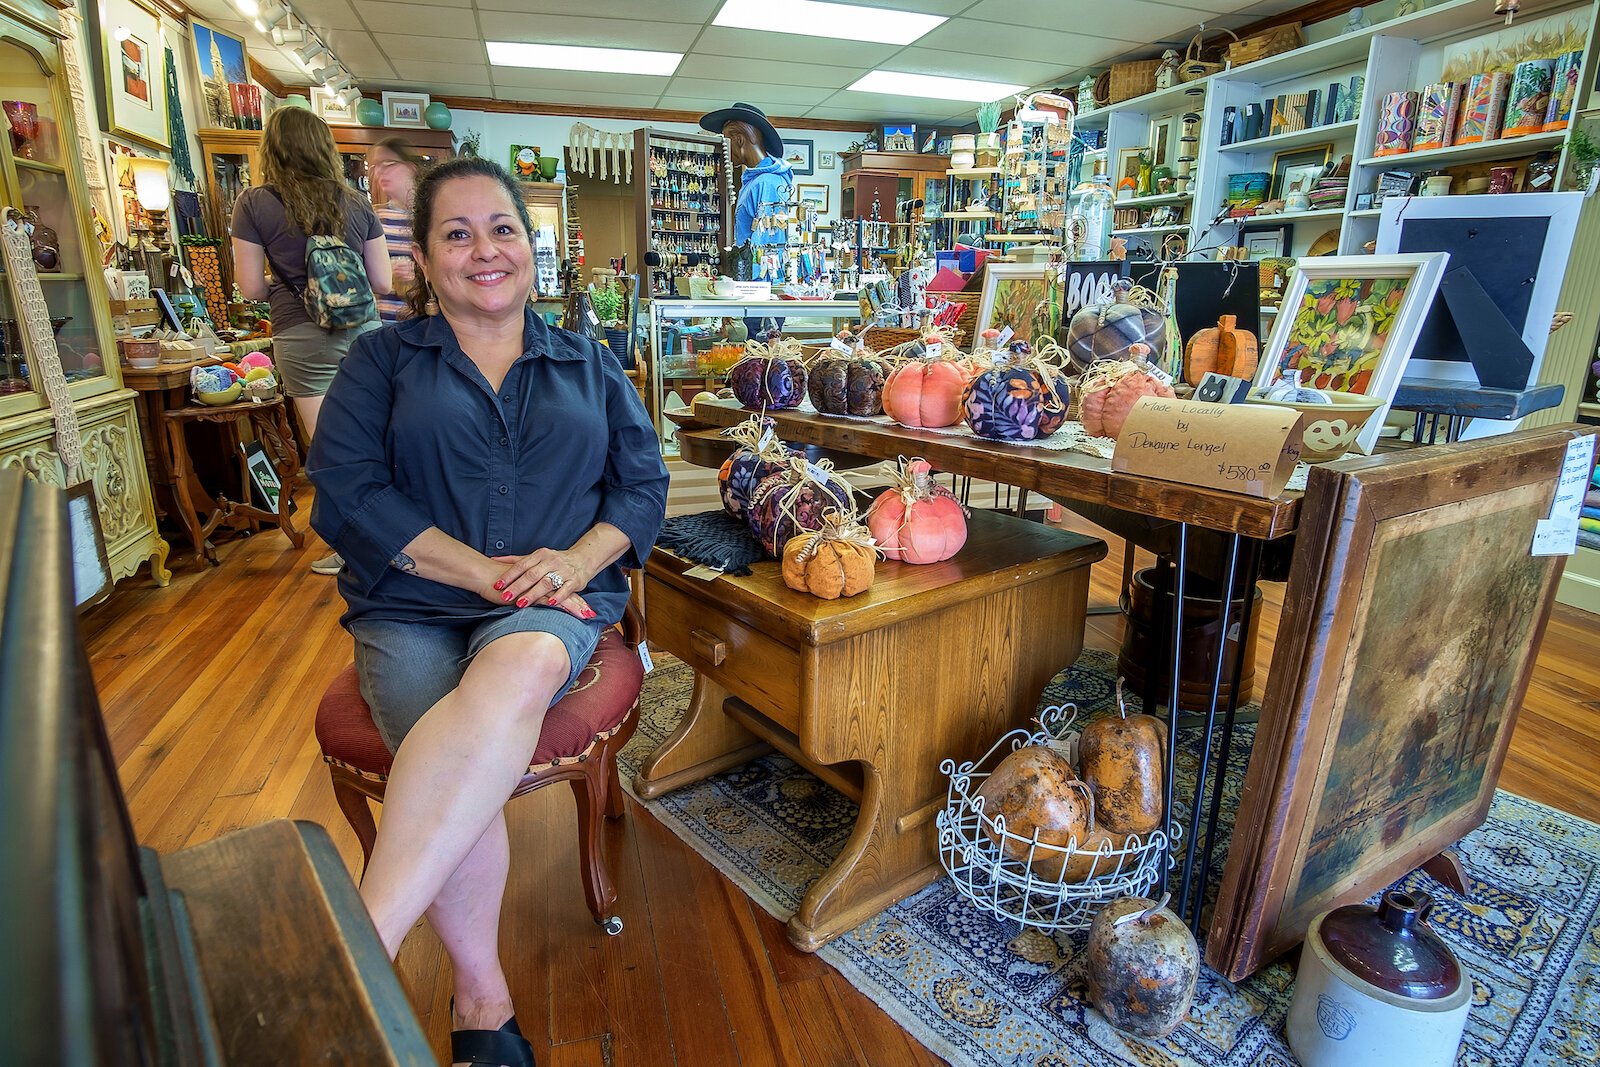 Maria Smyth owns the Eclectic Shoppe at 42 W. Canal St. in Downtown Wabash.